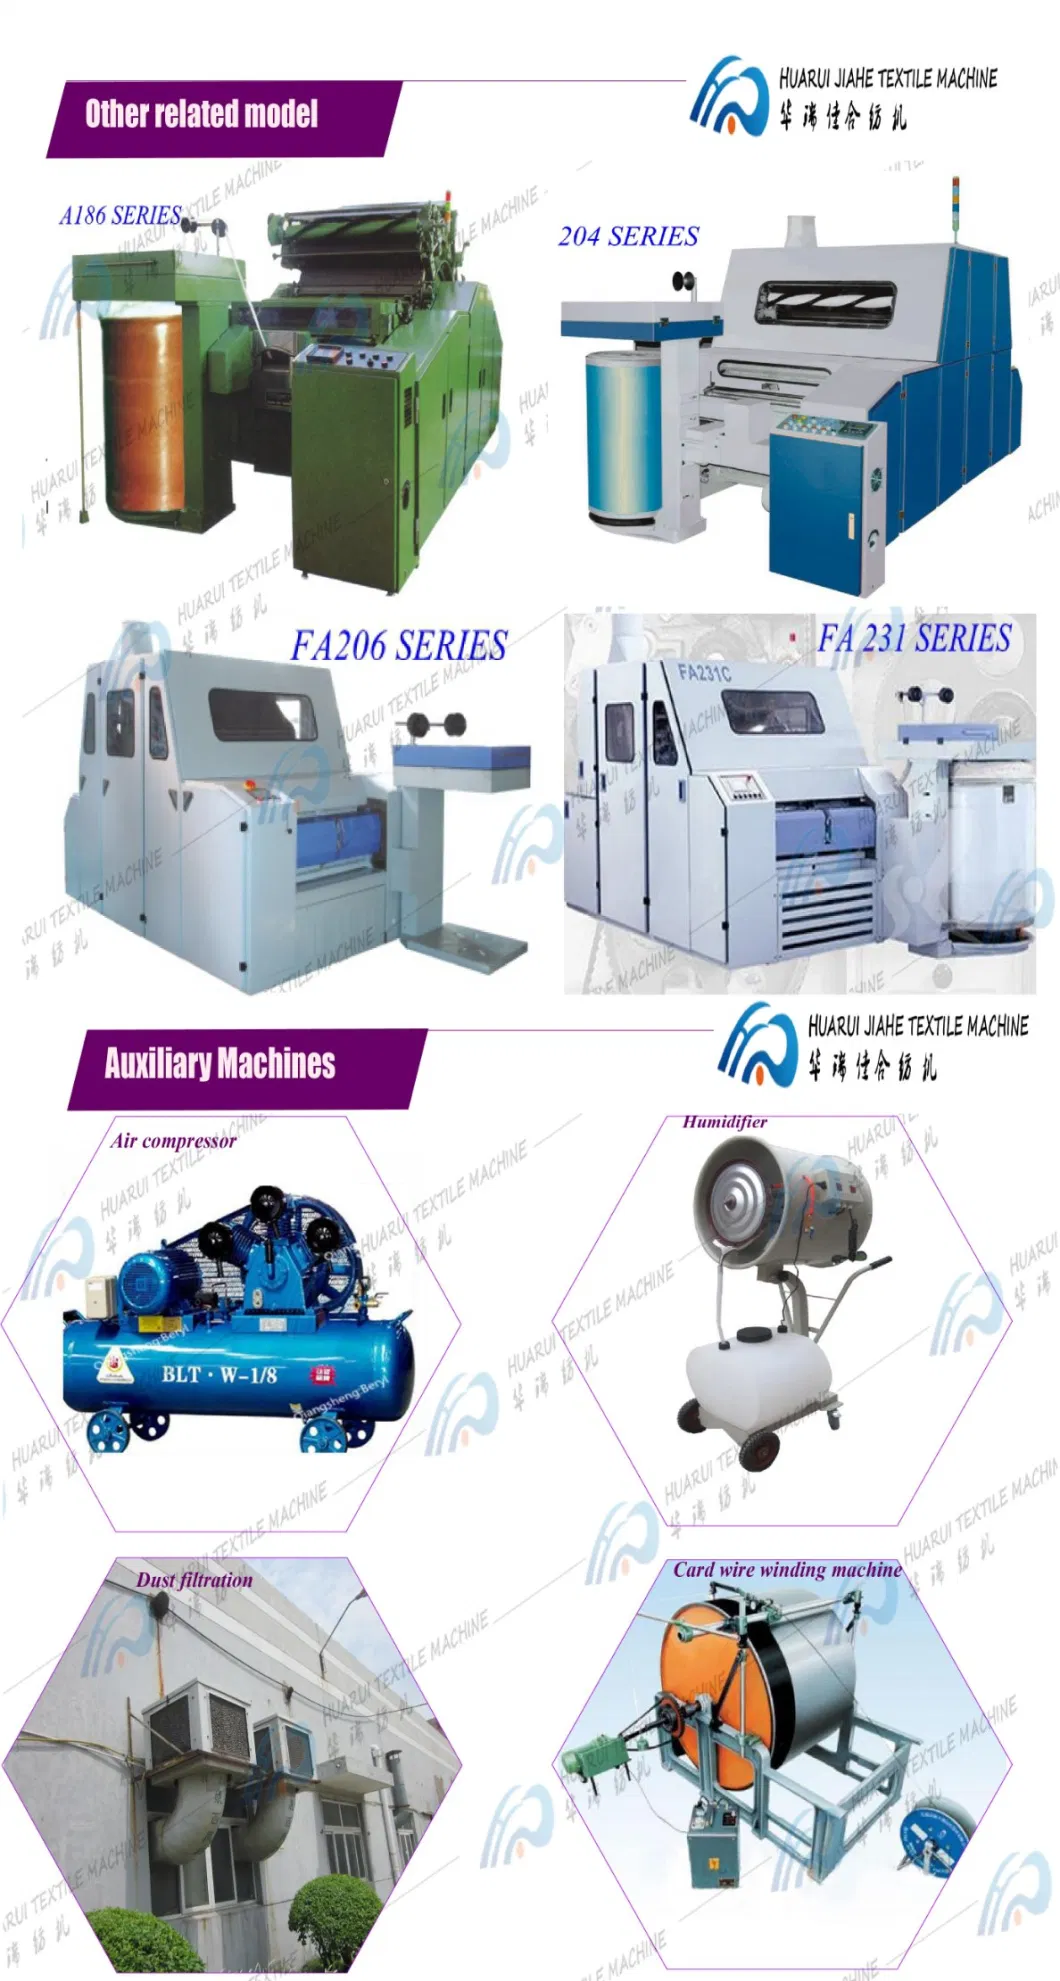 Manufacturers Supply Cheese Dyeing Machine, Thread Sample Proofing Machine, Yarn Proofing Equipment, Can Be Customized According to Needs